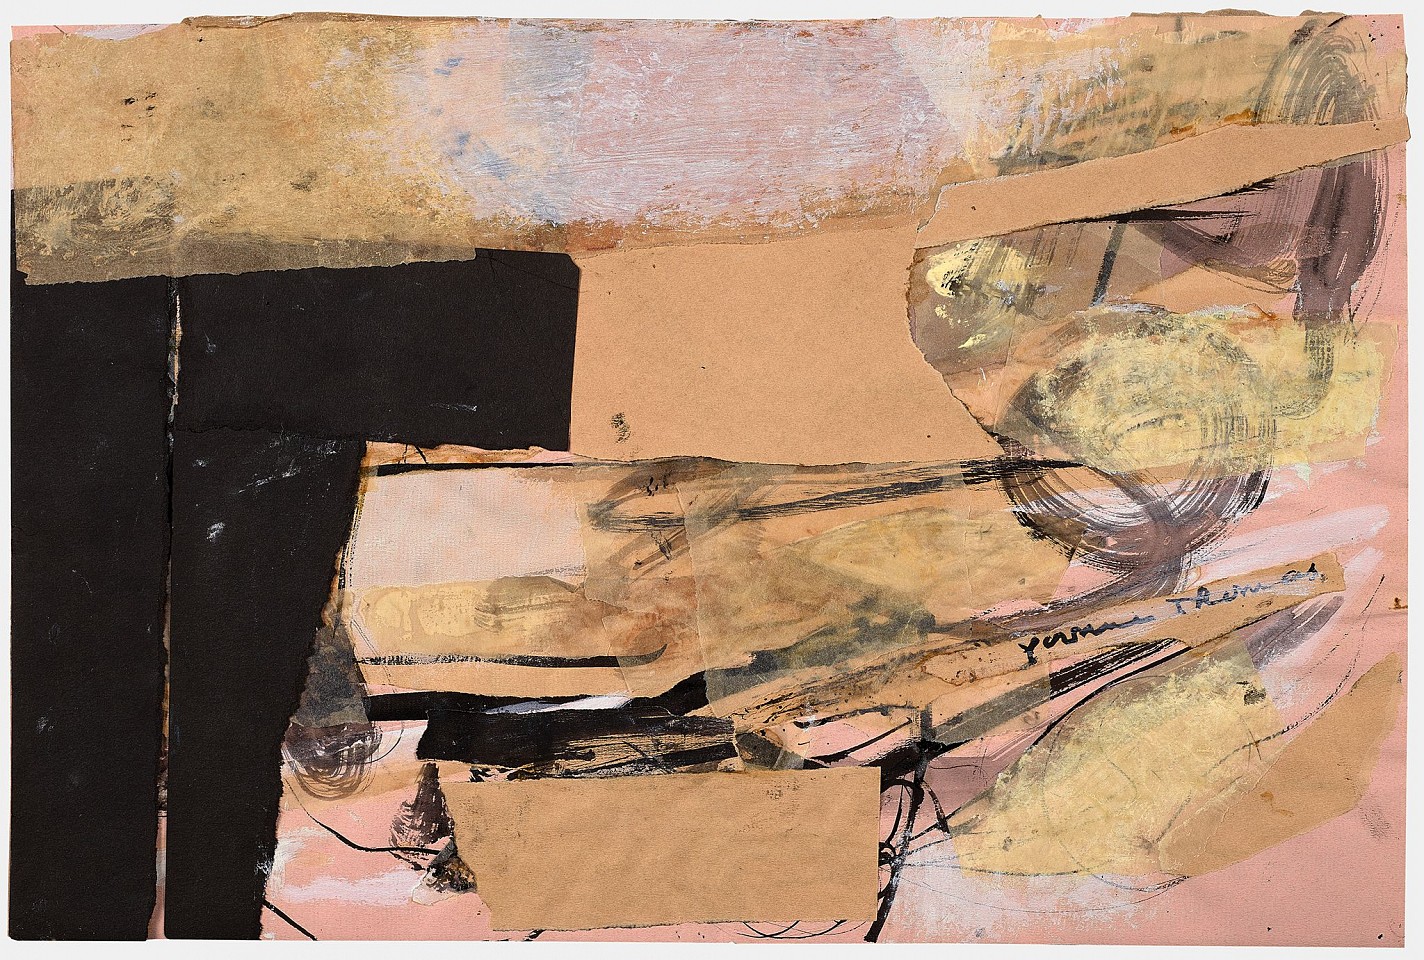 Yvonne Thomas, Pink and Black | SOLD, 1957
Collage, 11 3/4 x 17 3/4 in. (29.8 x 45.1 cm)
THO-00057